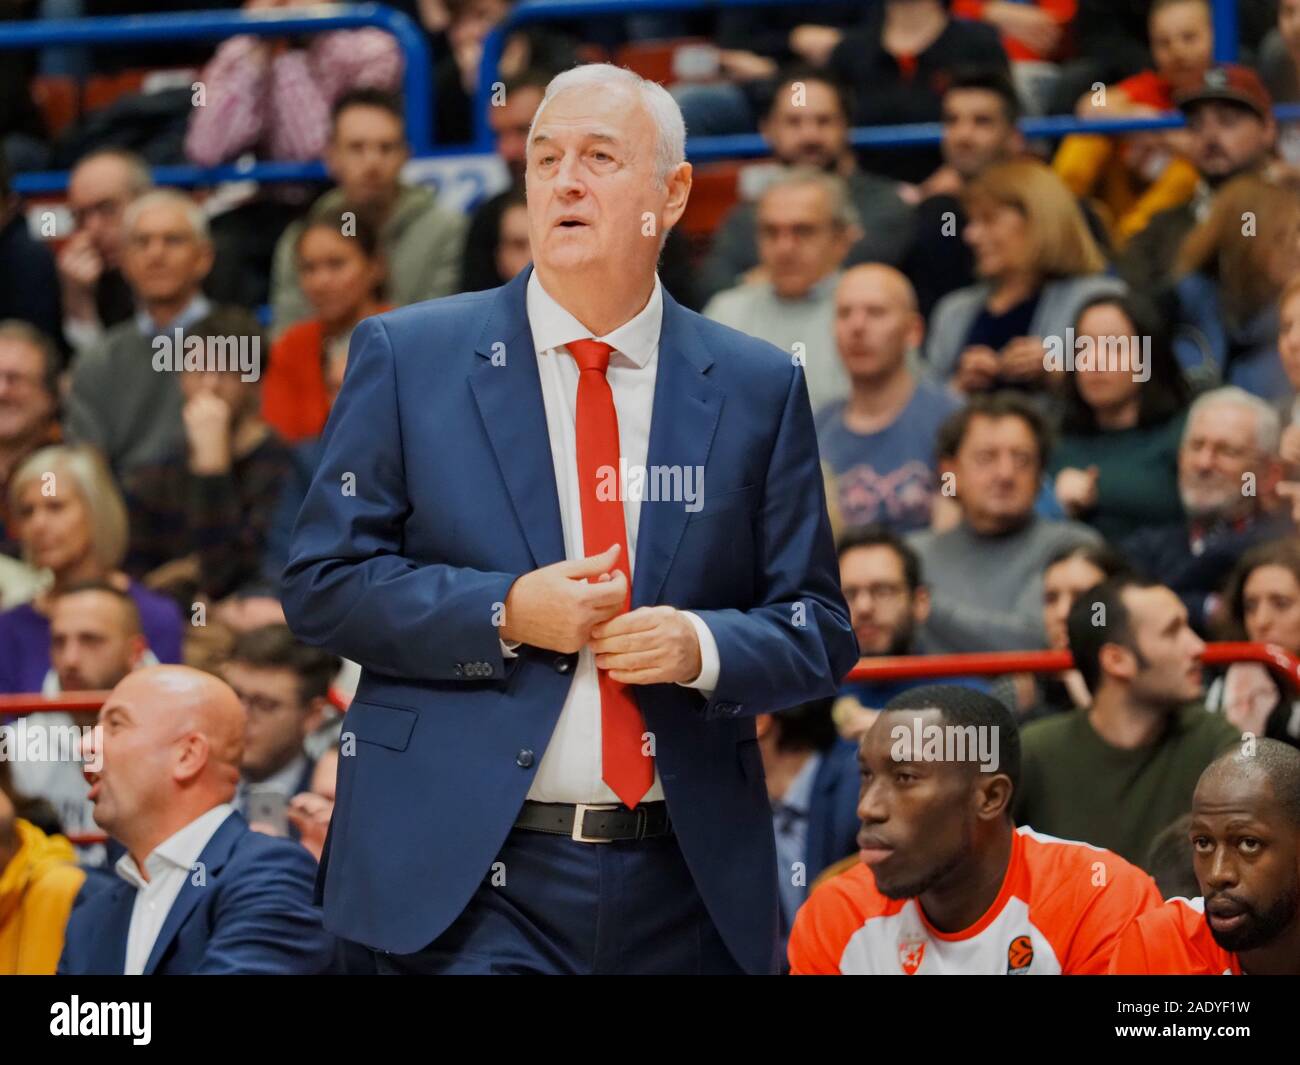 3,467 Headcoach Of Crvena Zvezda Photos & High Res Pictures - Getty Images